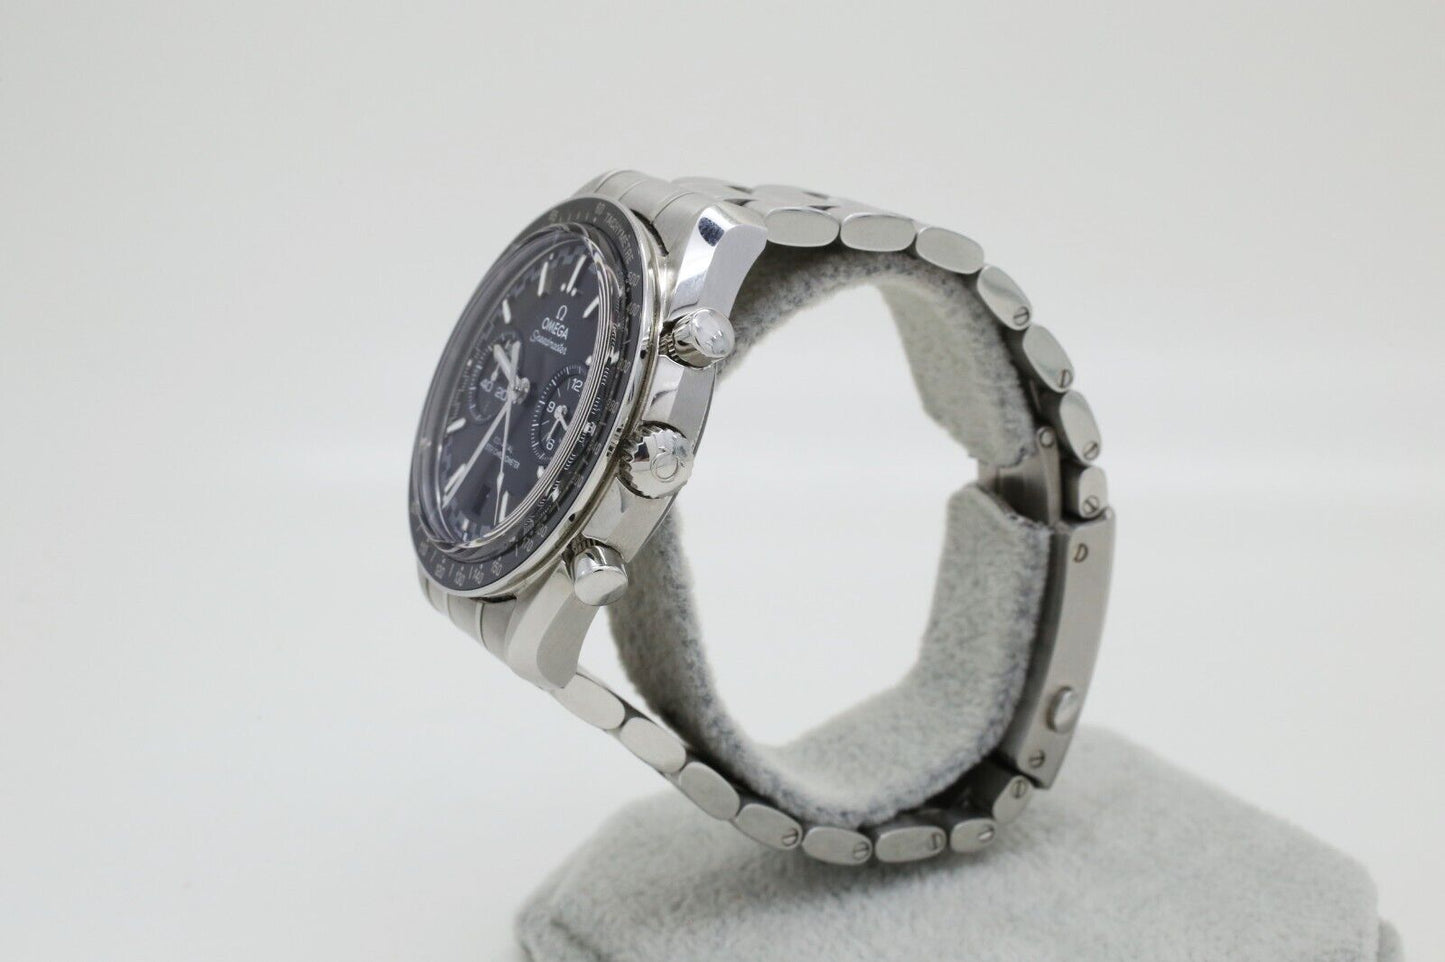 Omega Speedmaster Racing Co-Axial Master Chronometer Chronograph 44mm Watch